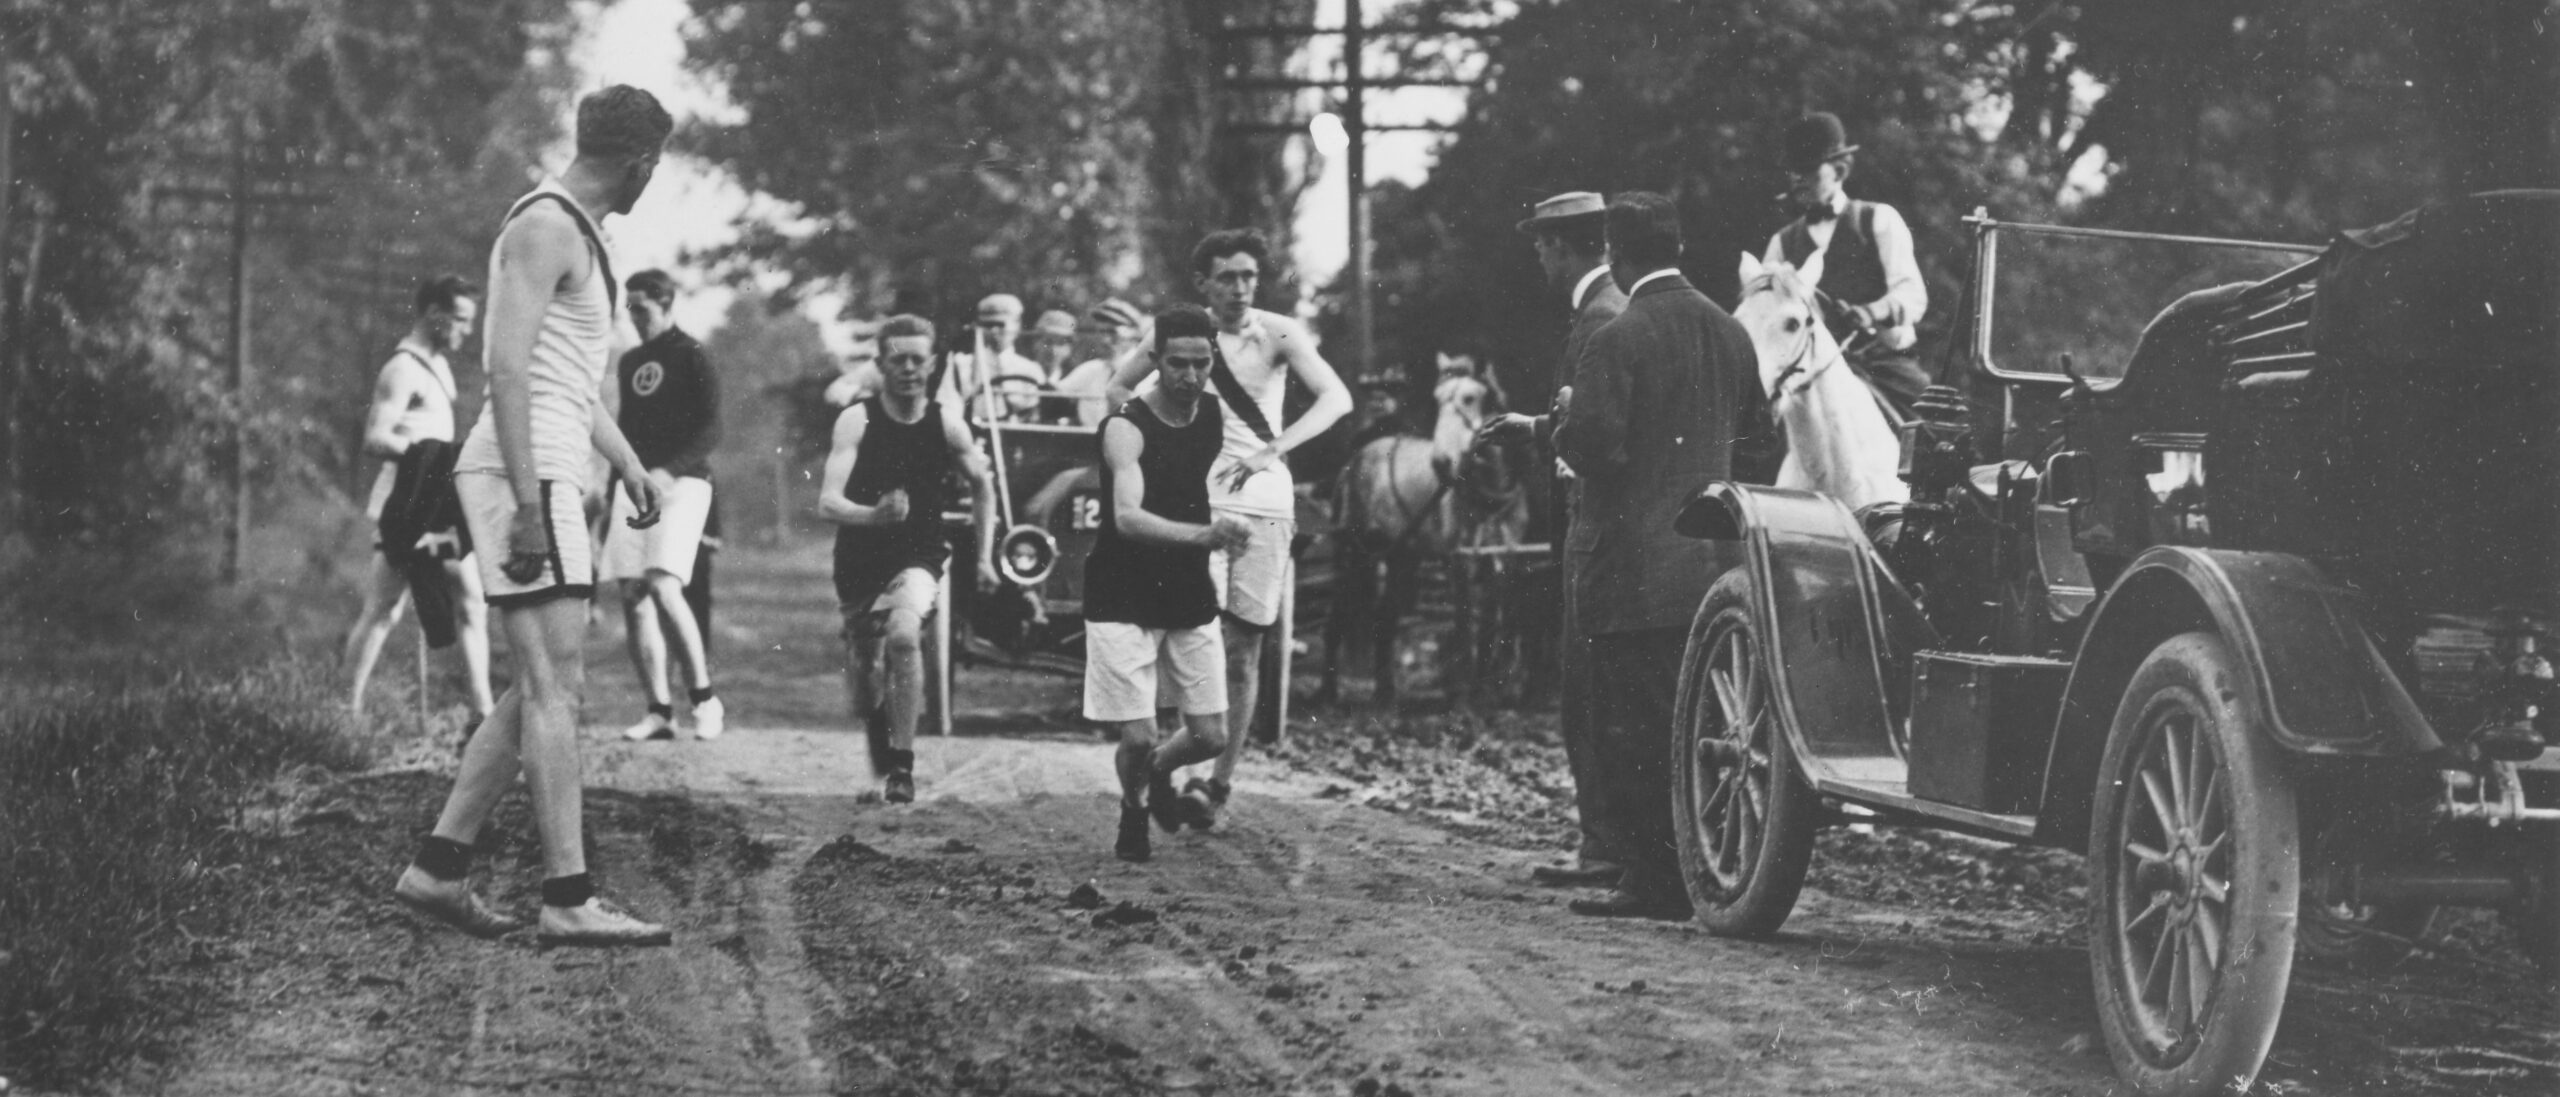 Black and white photo of two men starting their leg of the Hudson Relays at the 1911 event.